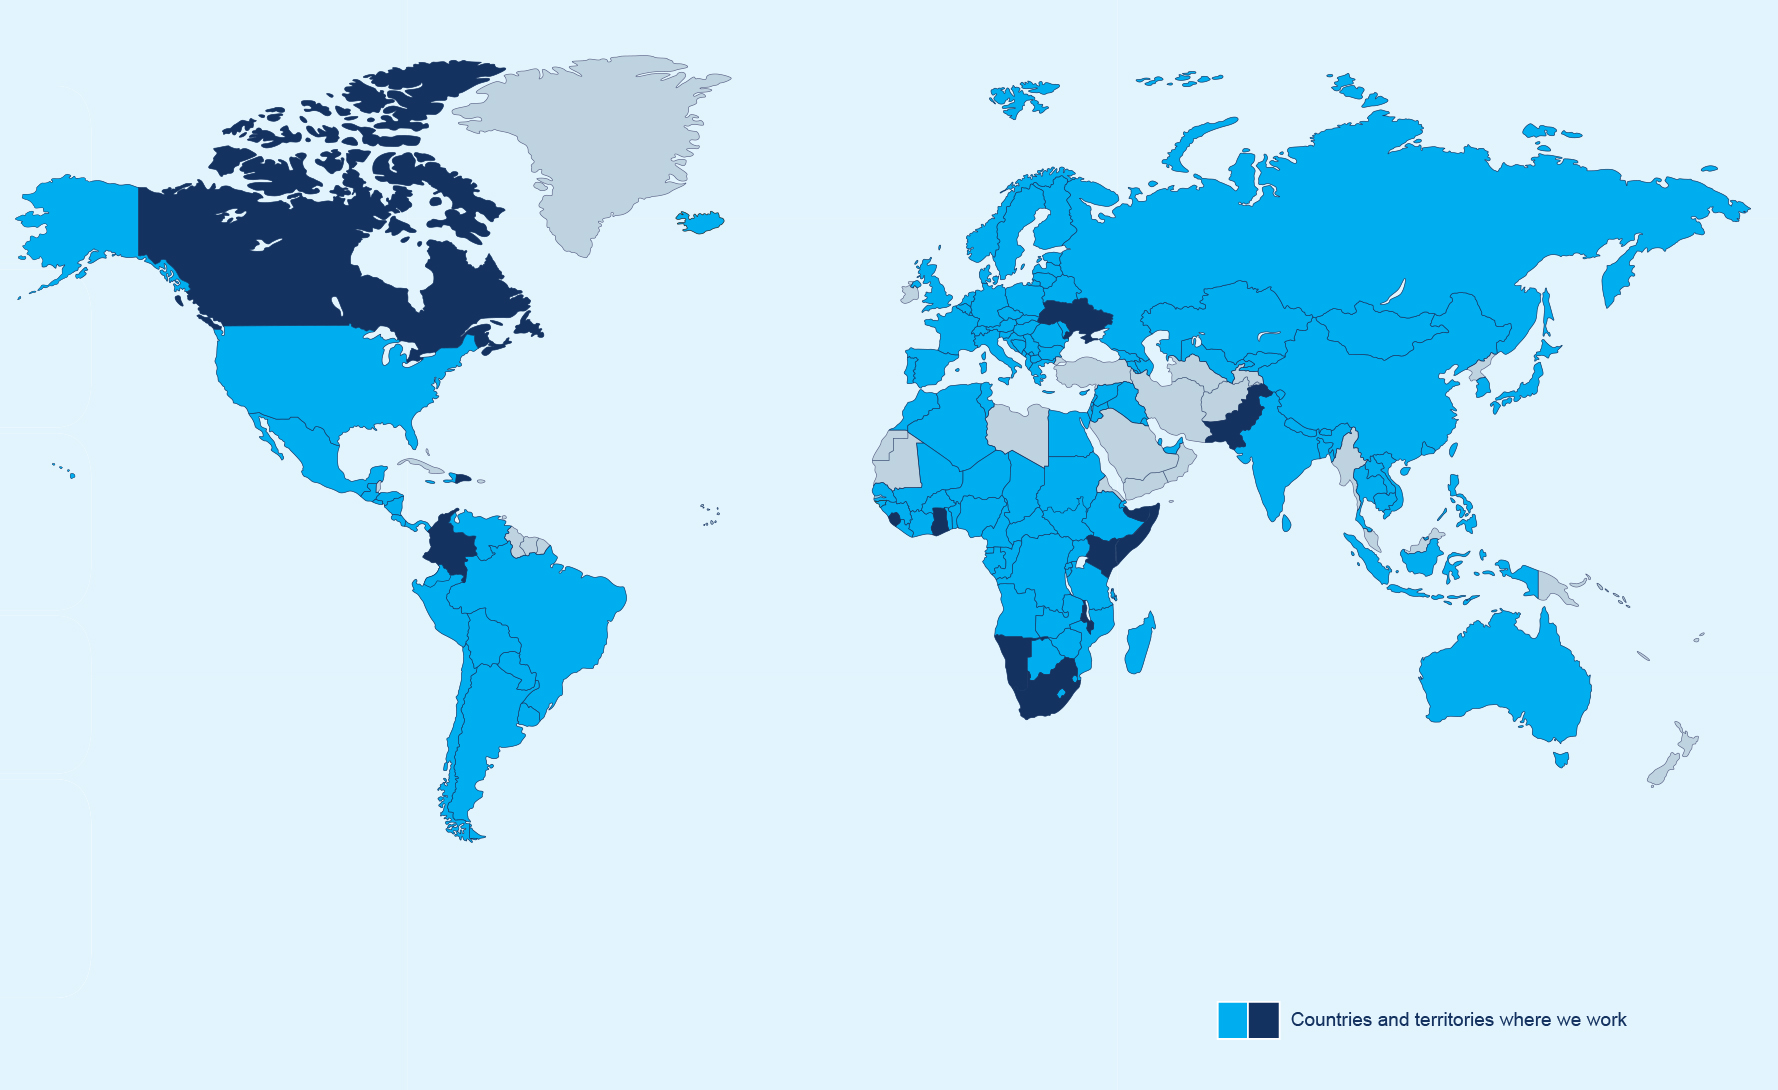 World Map where 130+ countries are highlighted indicating where SOS Children's Villages has projects.